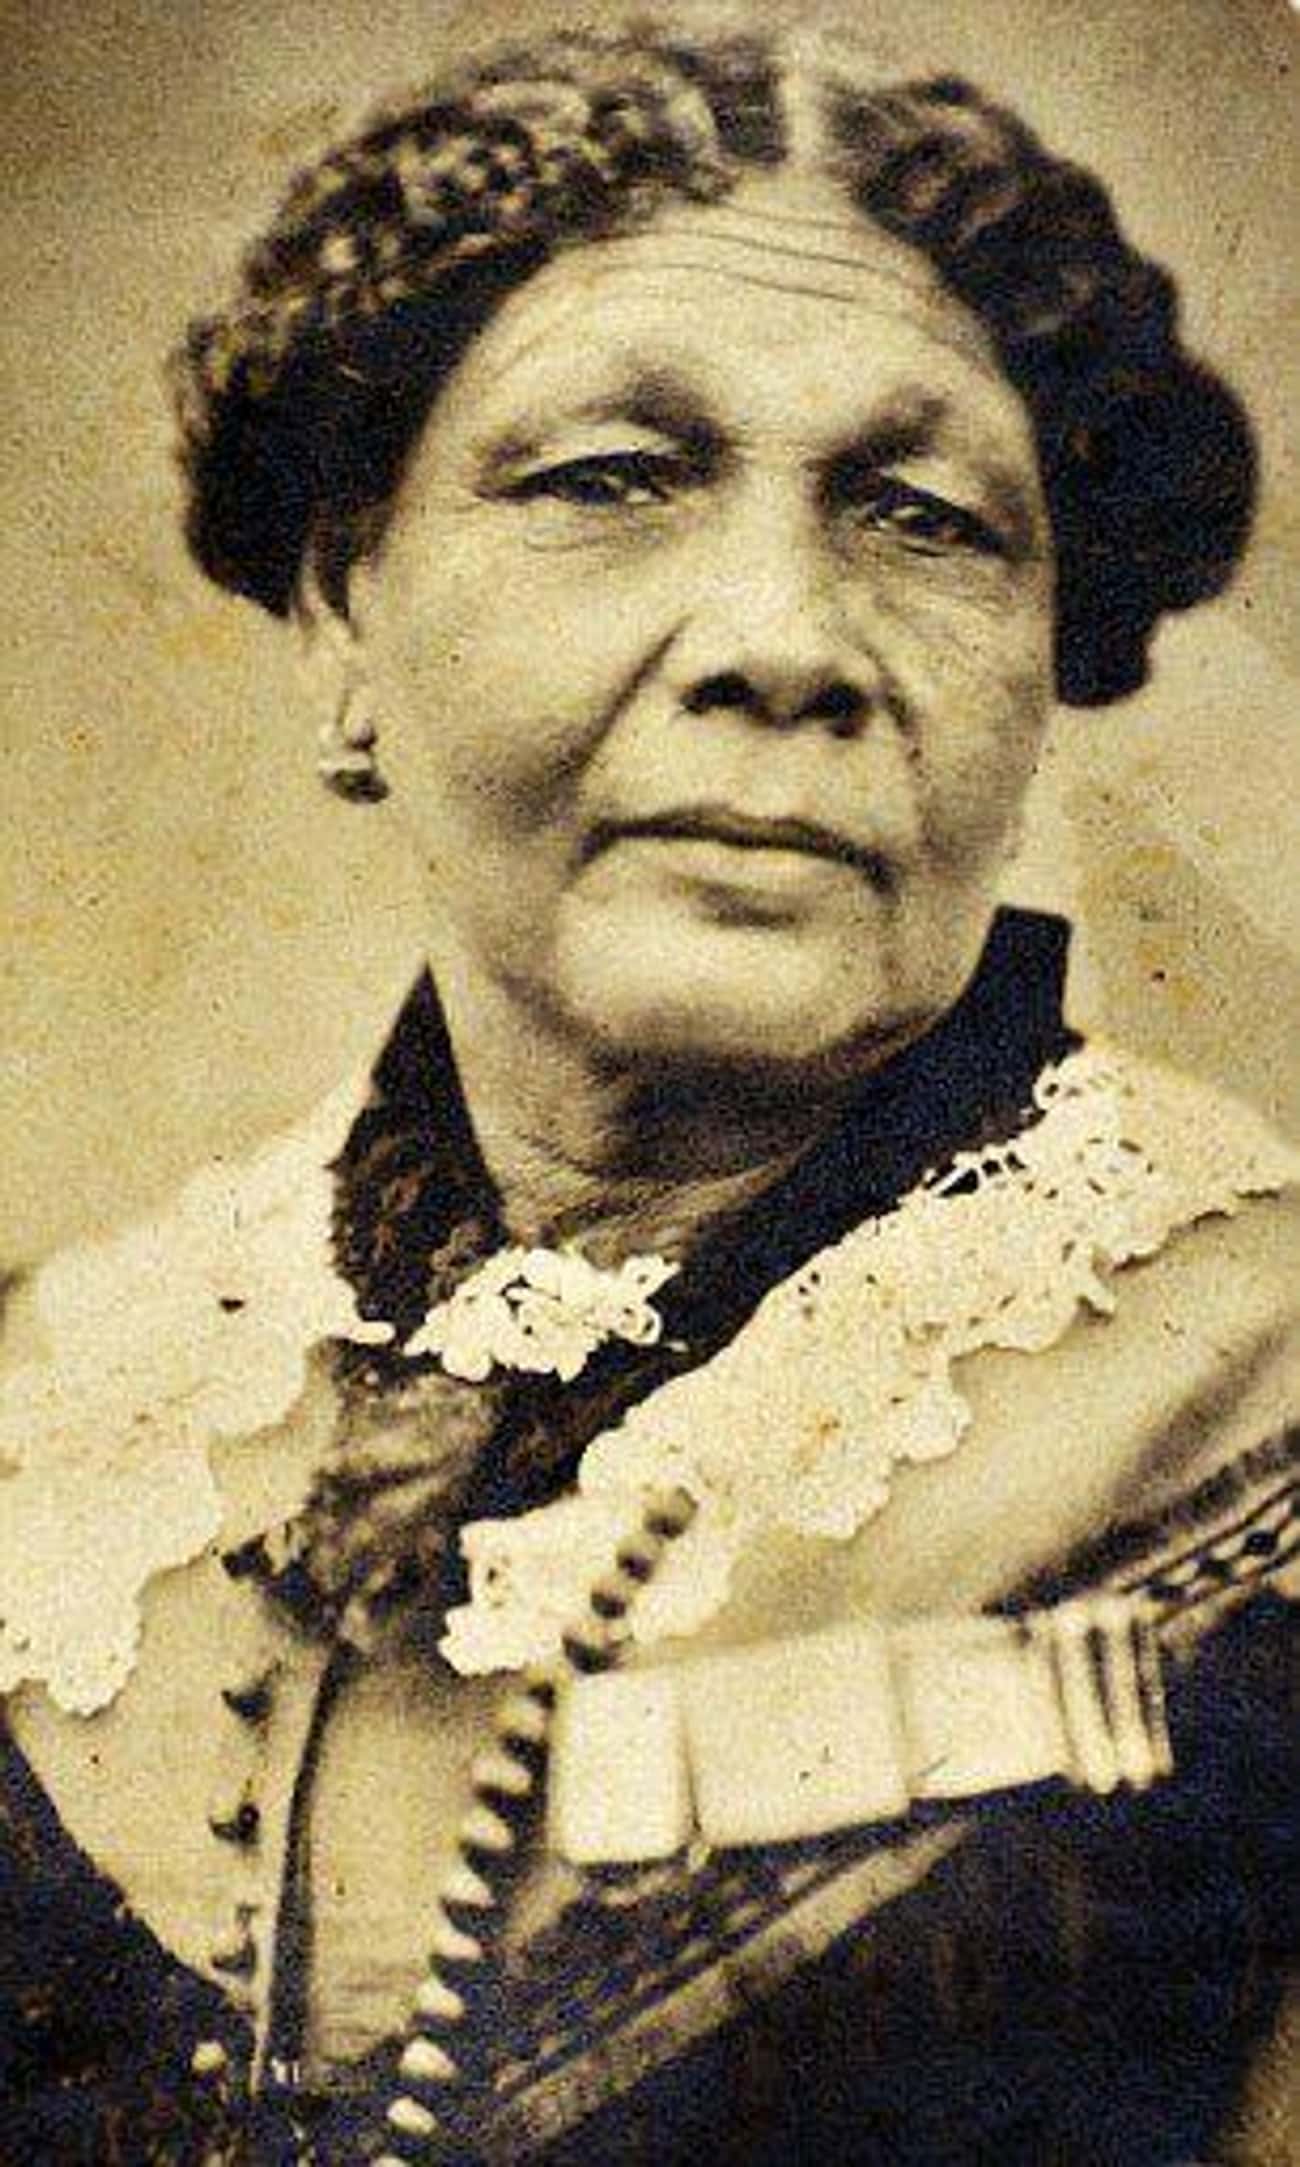 After Rejection From The British Military, Mary Seacole Started Her Own Hospital To Help Wounded Soldiers During The Crimean War